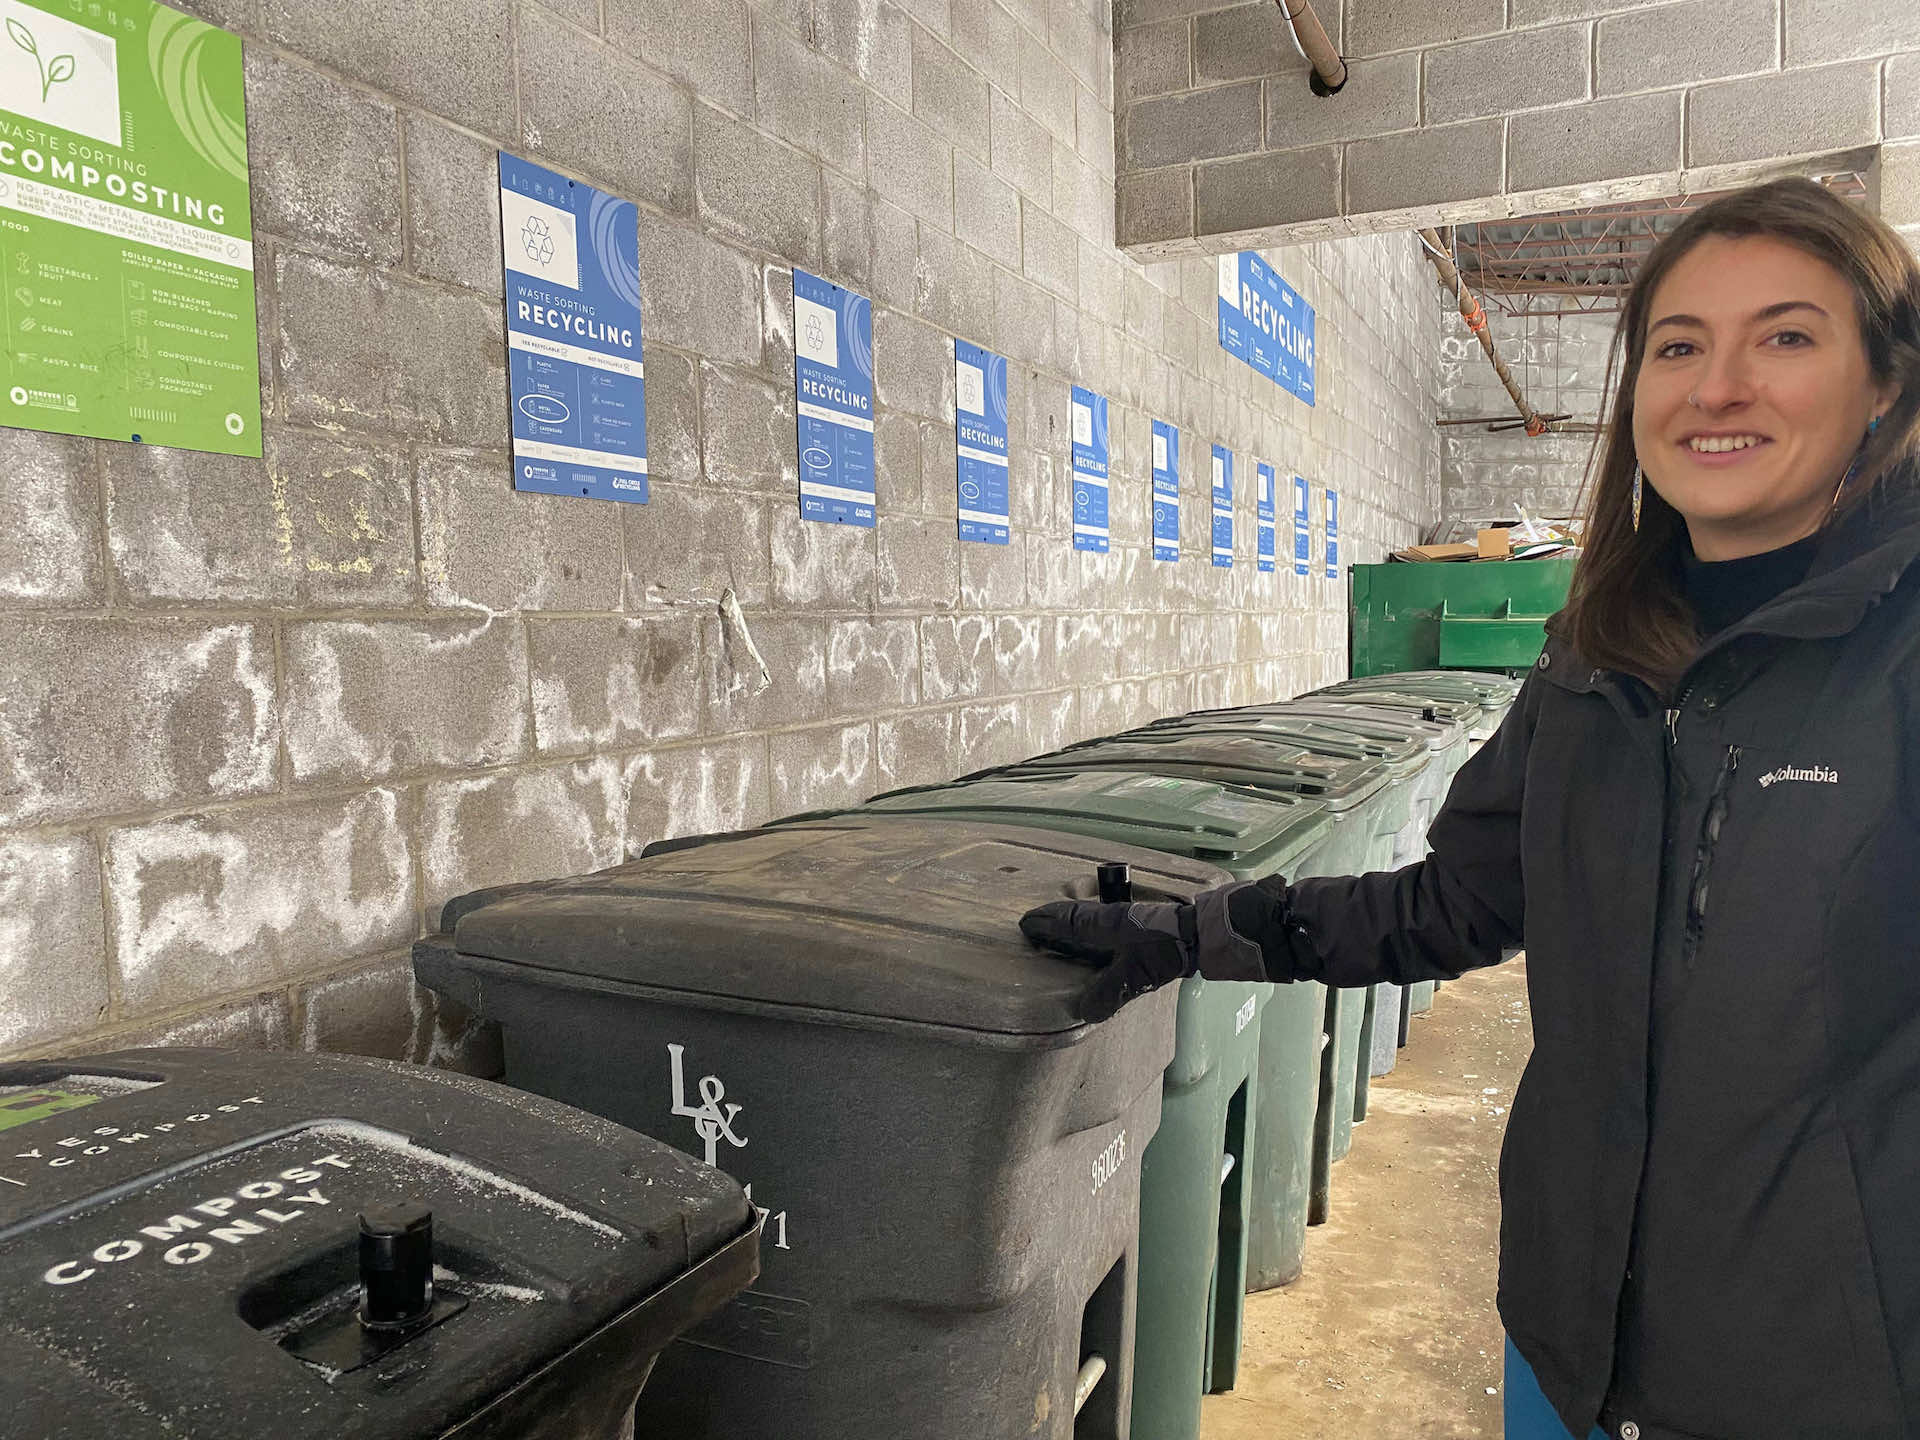 Amy stands near recycling bins